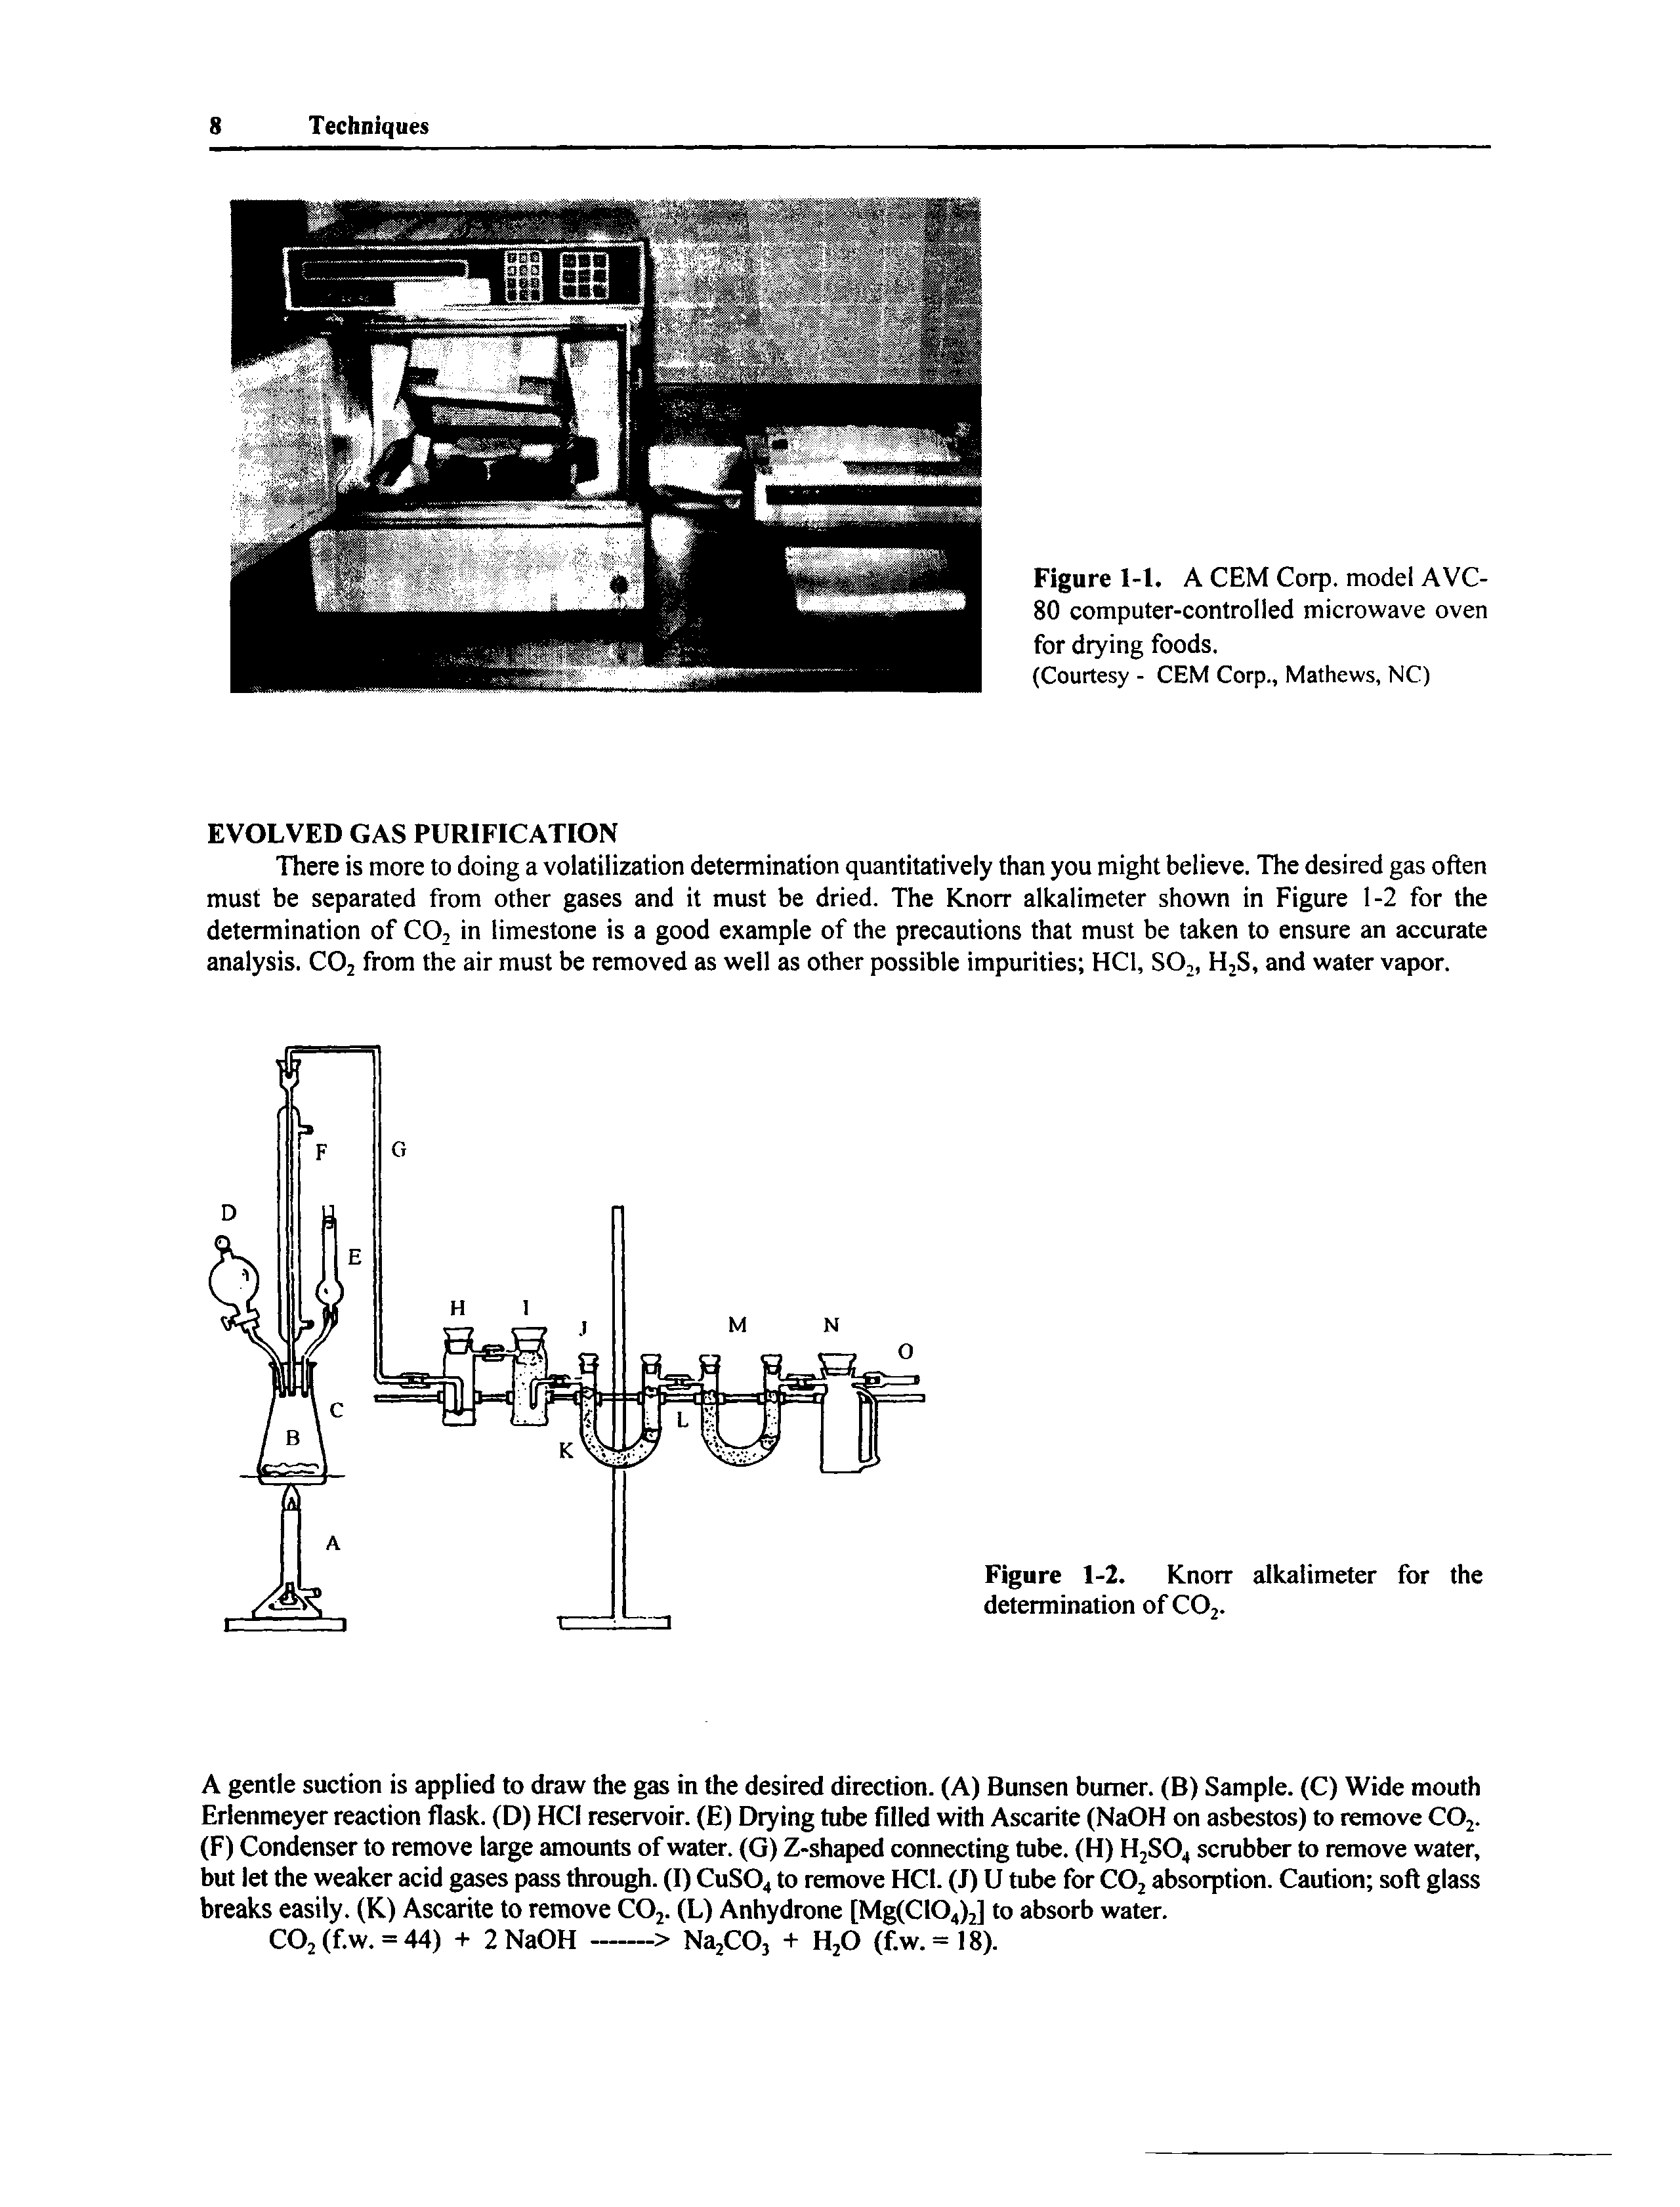 Figure 1-1. A CEM Corp. model AVC-80 computer-controlled microwave oven for drying foods.